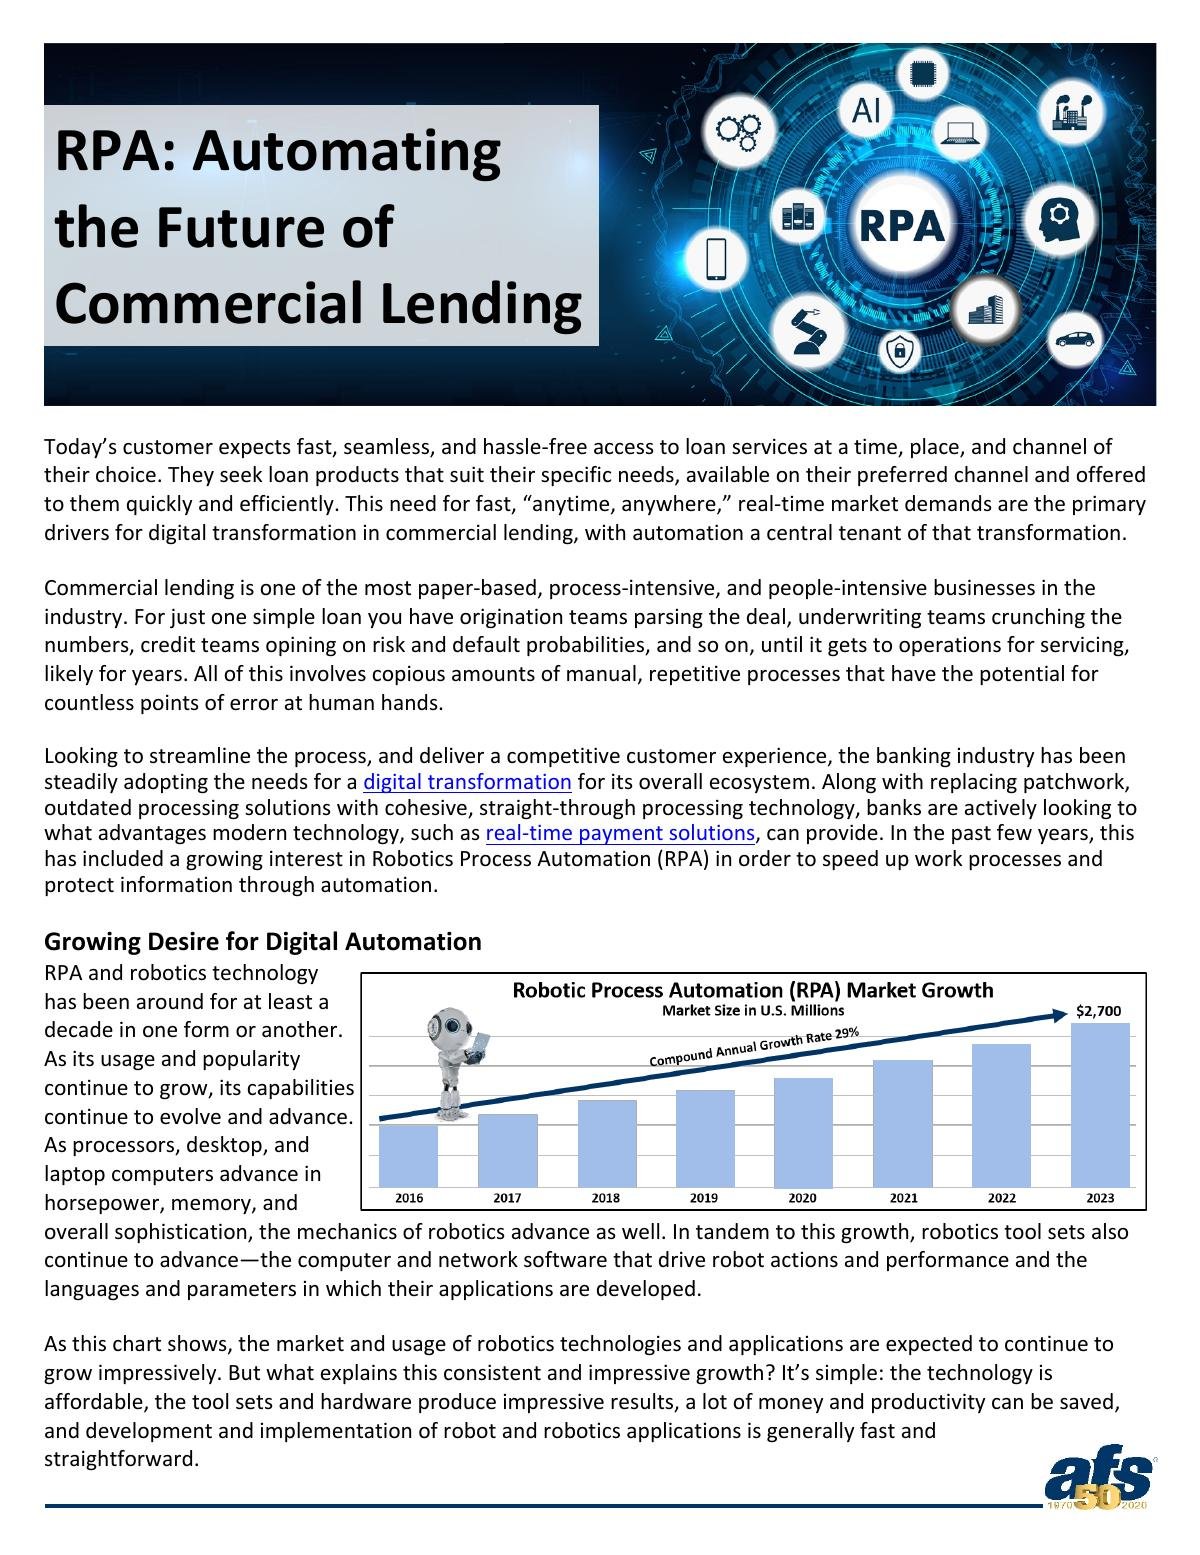 RPA: Automating the Future of Commercial Lending